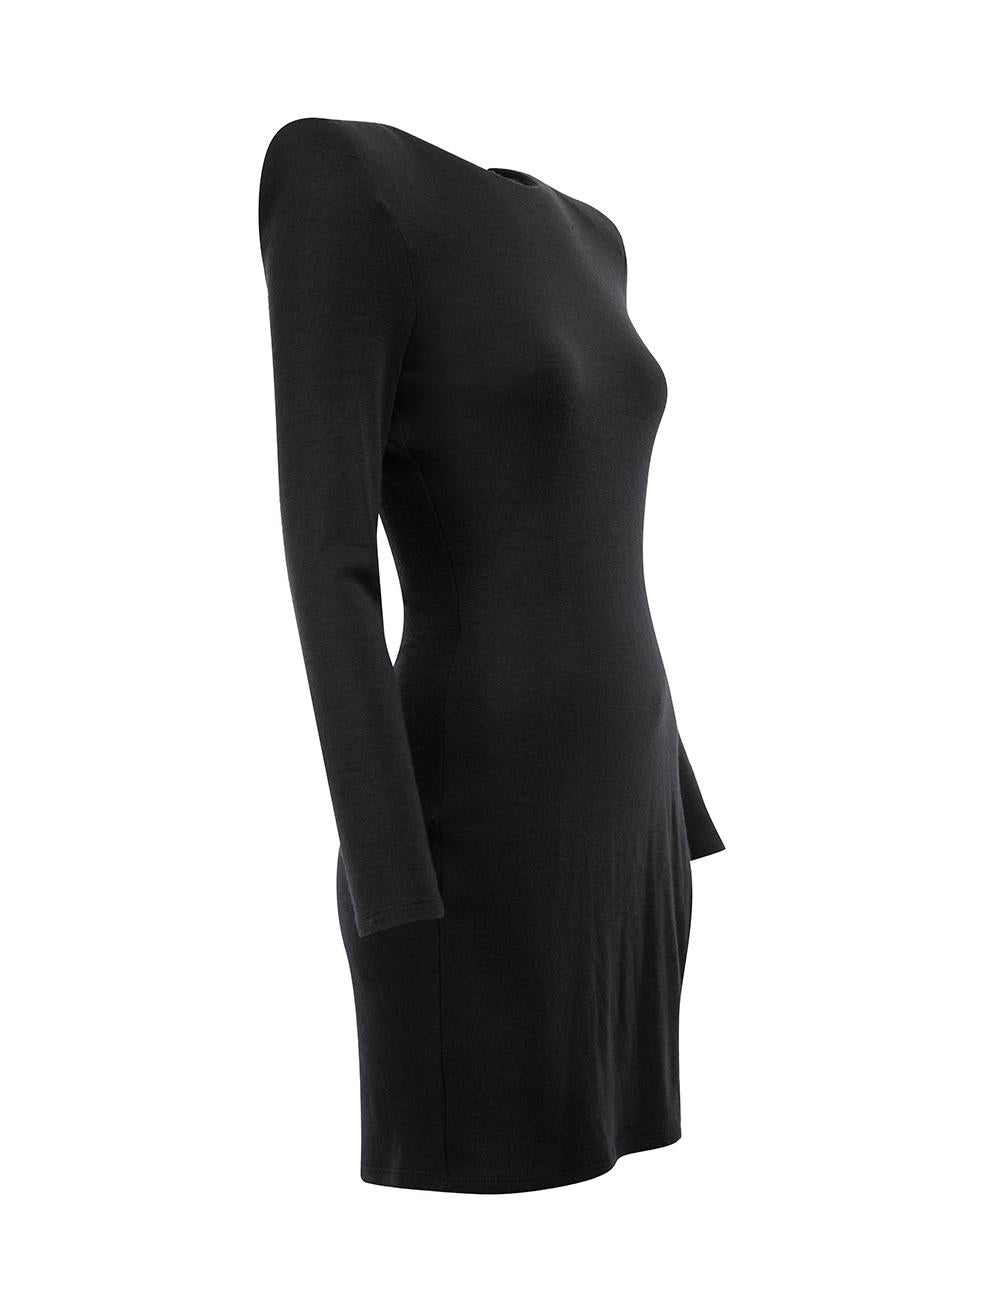 CONDITION is Good. Minor wear to dress is evident. Light wear to outer fabric where a significant amount of pilling can be seen on this used Balmain designer resale item.   Details  Black Wool Mini dress Round neckline Shoulder padded long sleeves